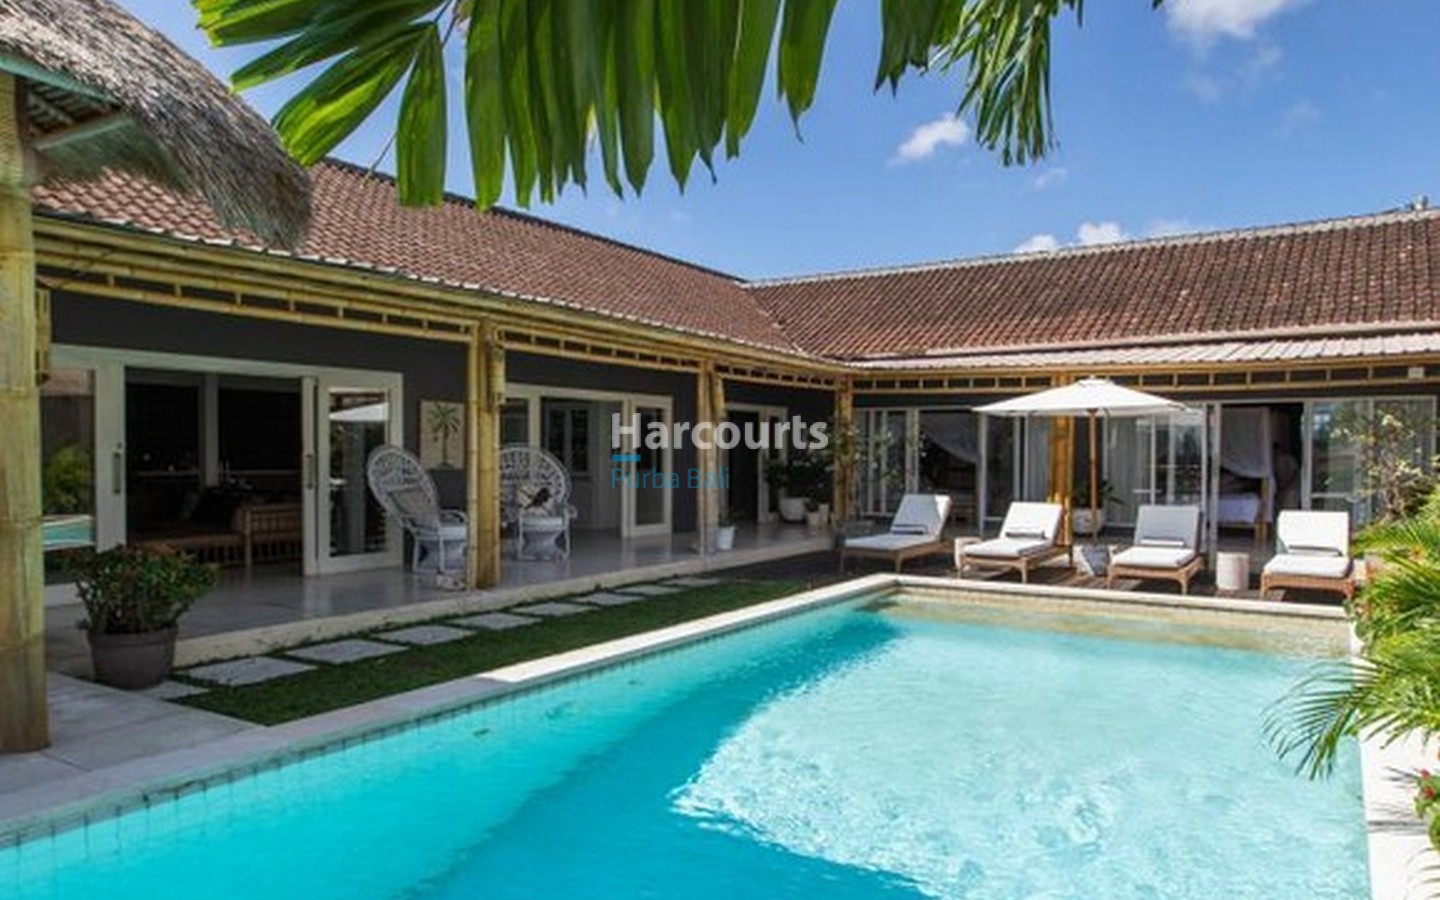 Bali real estate investment